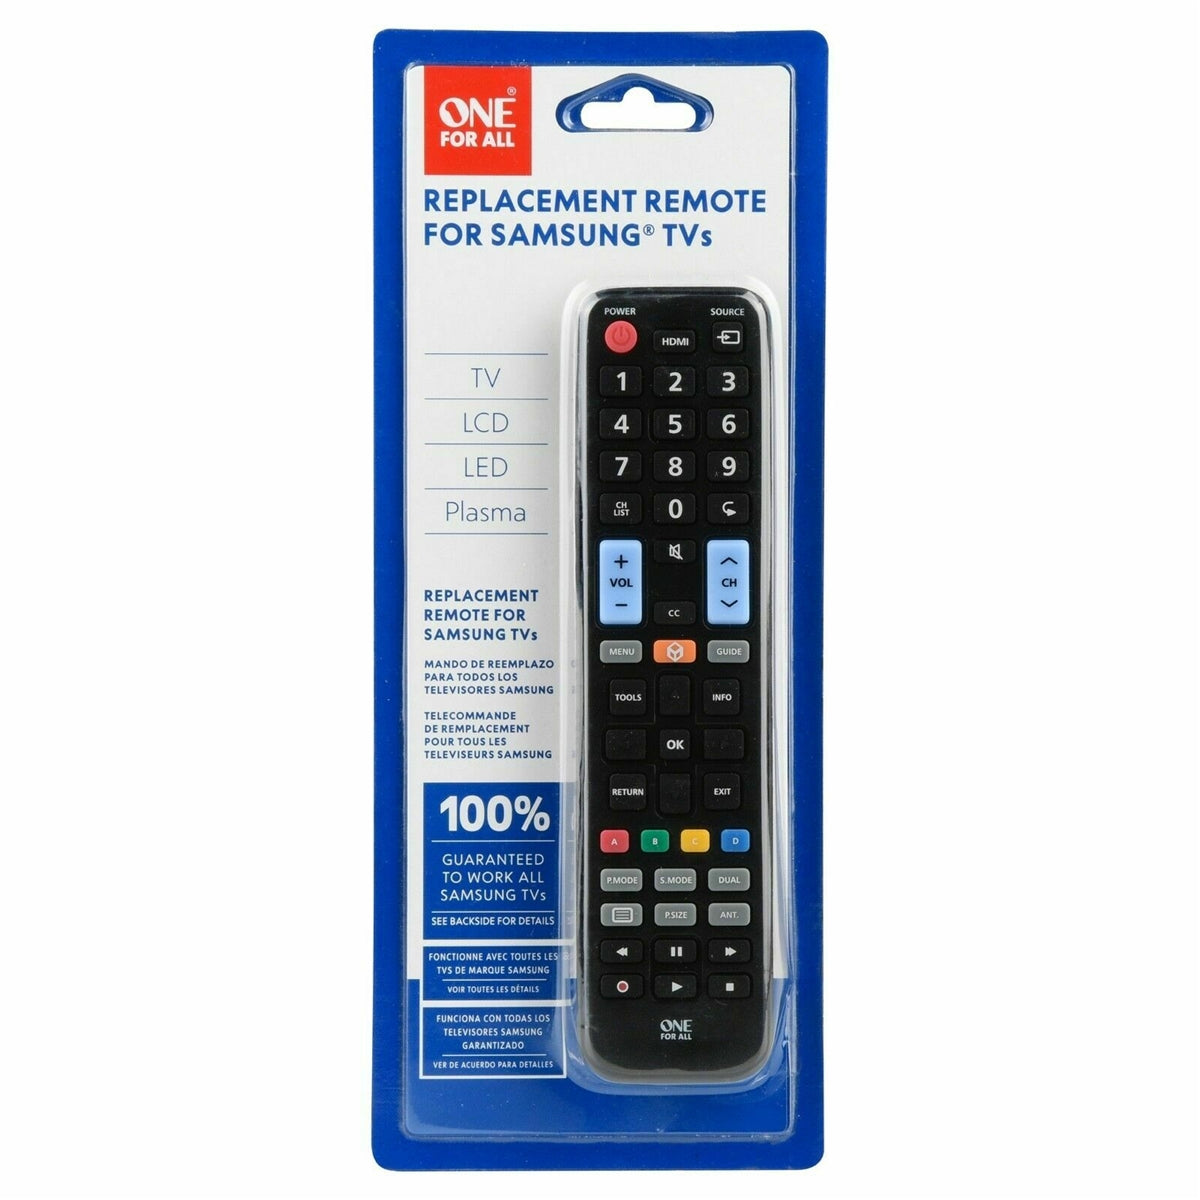 ONE FOR ALL Replacement Remote for Samsung® TVs